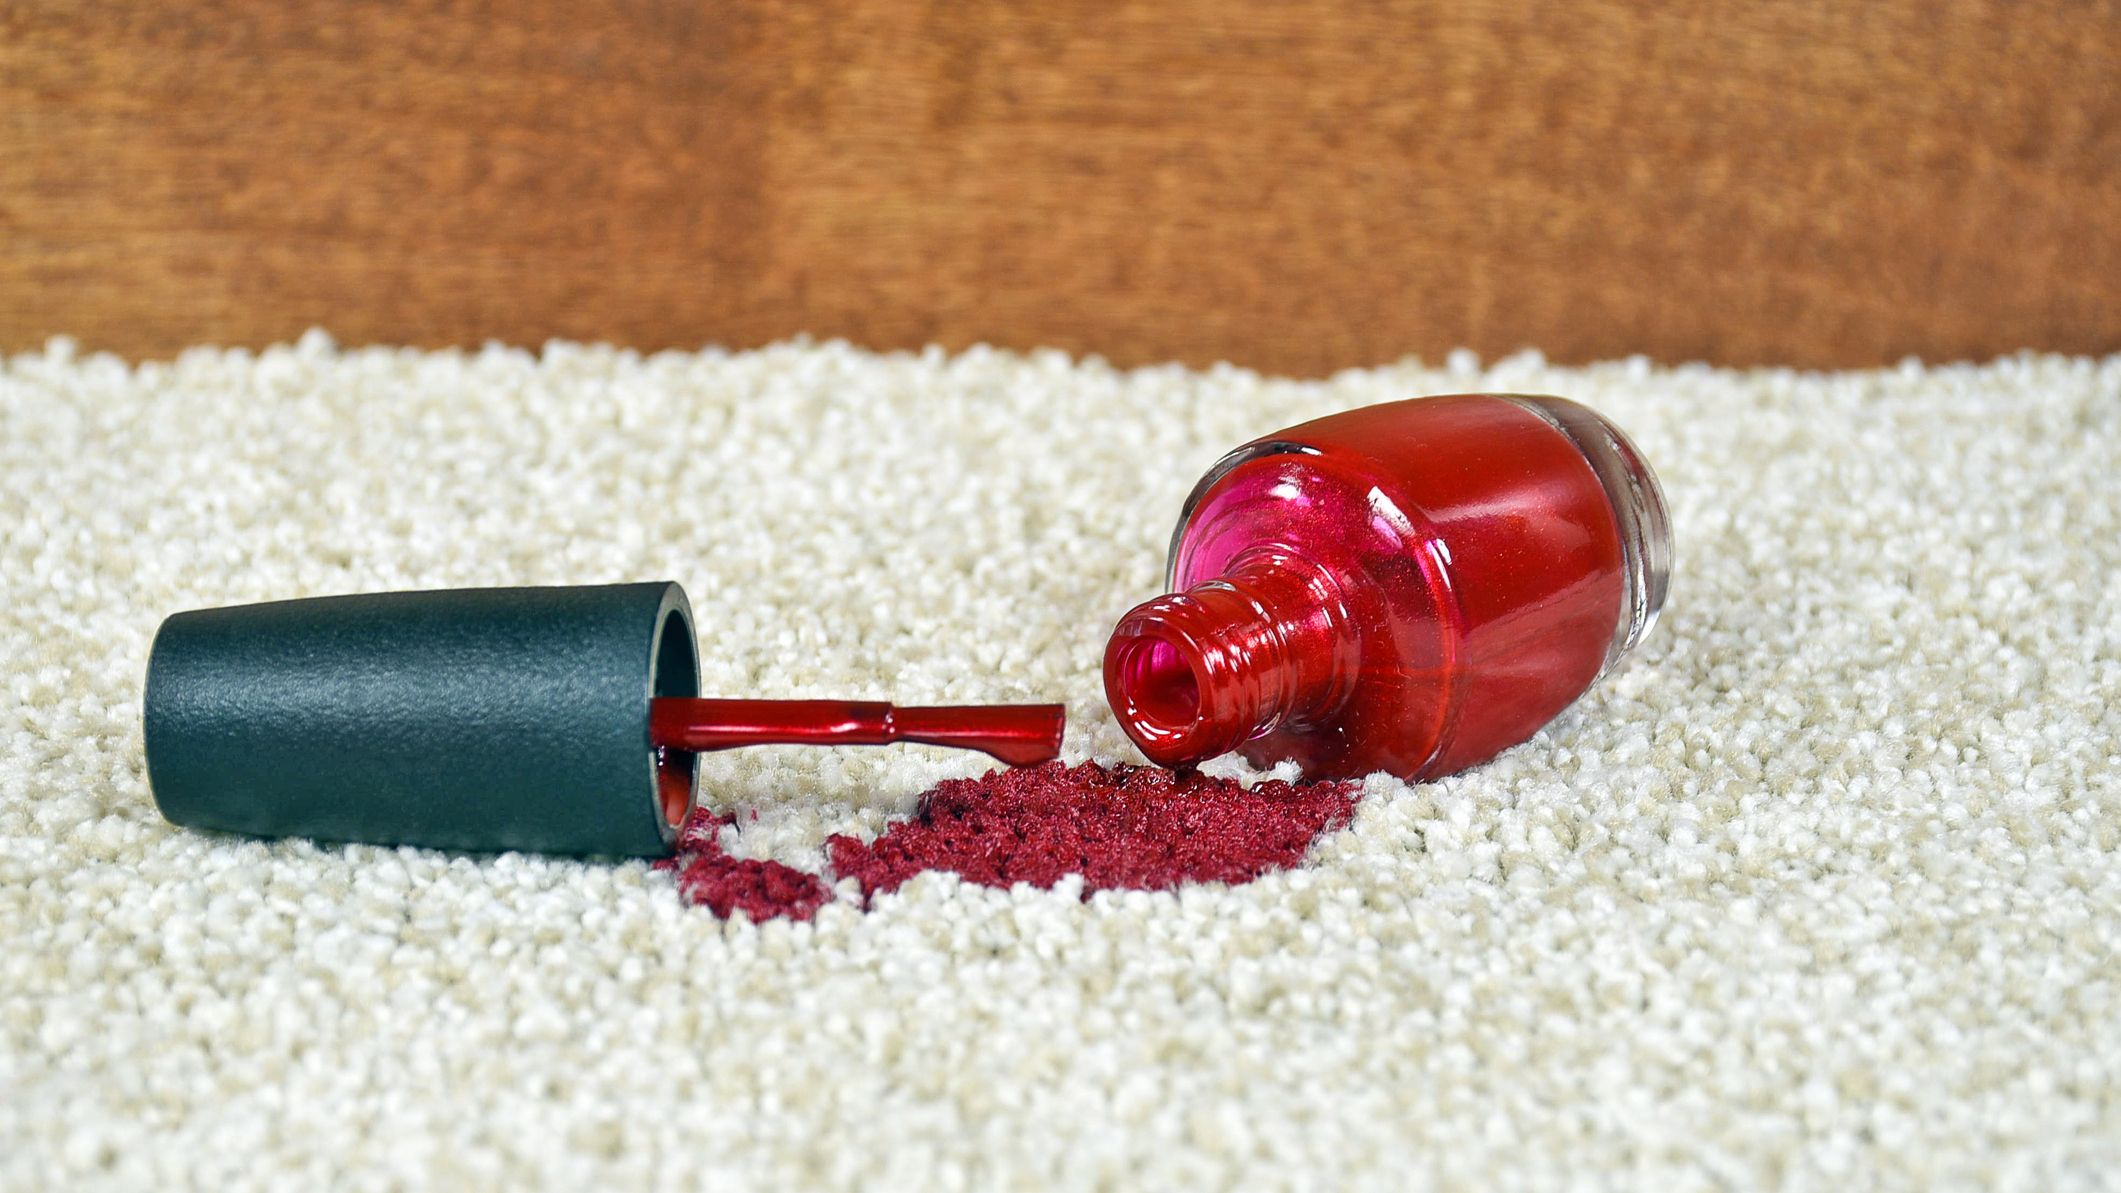 How to Get Nail Polish out of Your Carpet - How to Remove Dried Nail Polish  From Carpet